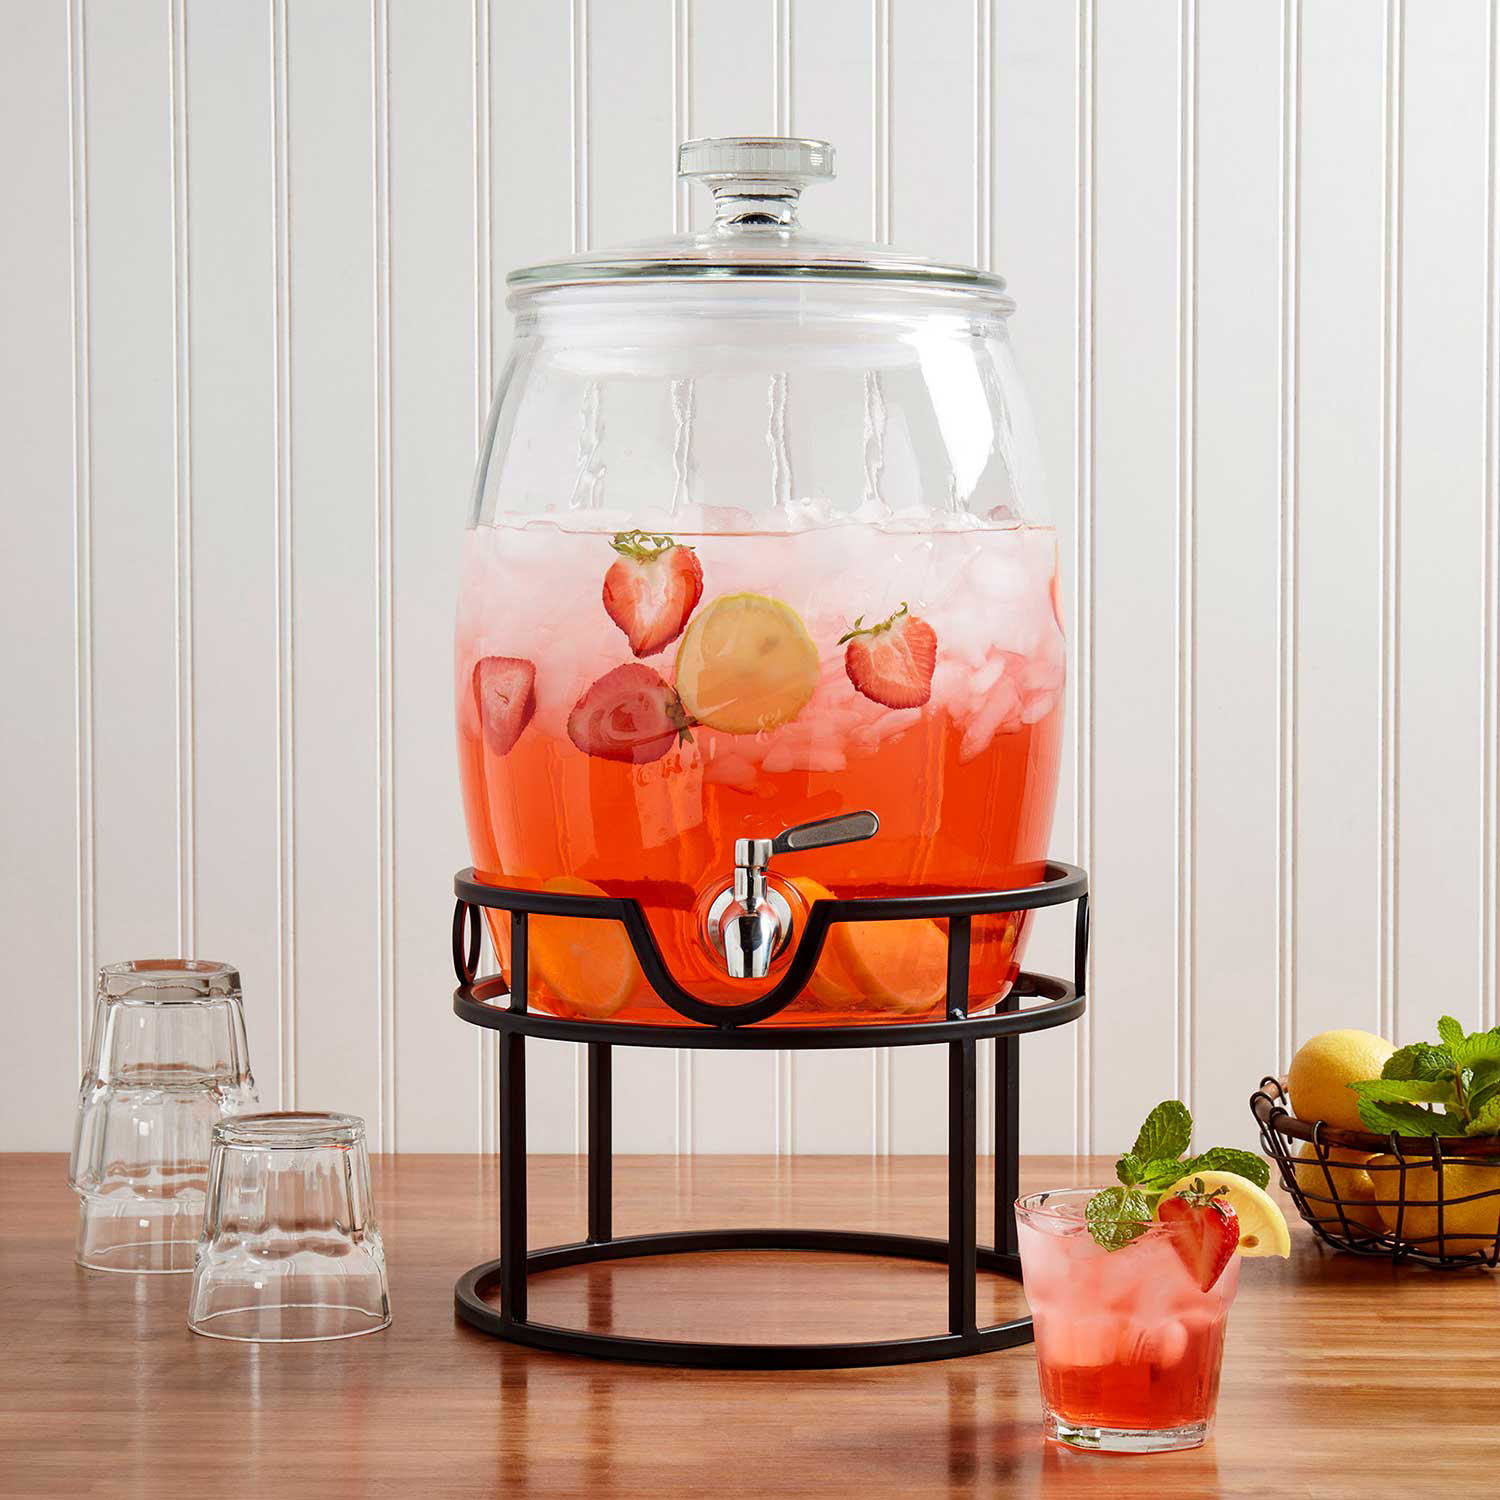 A drink dispenser filled with a strawberry drink